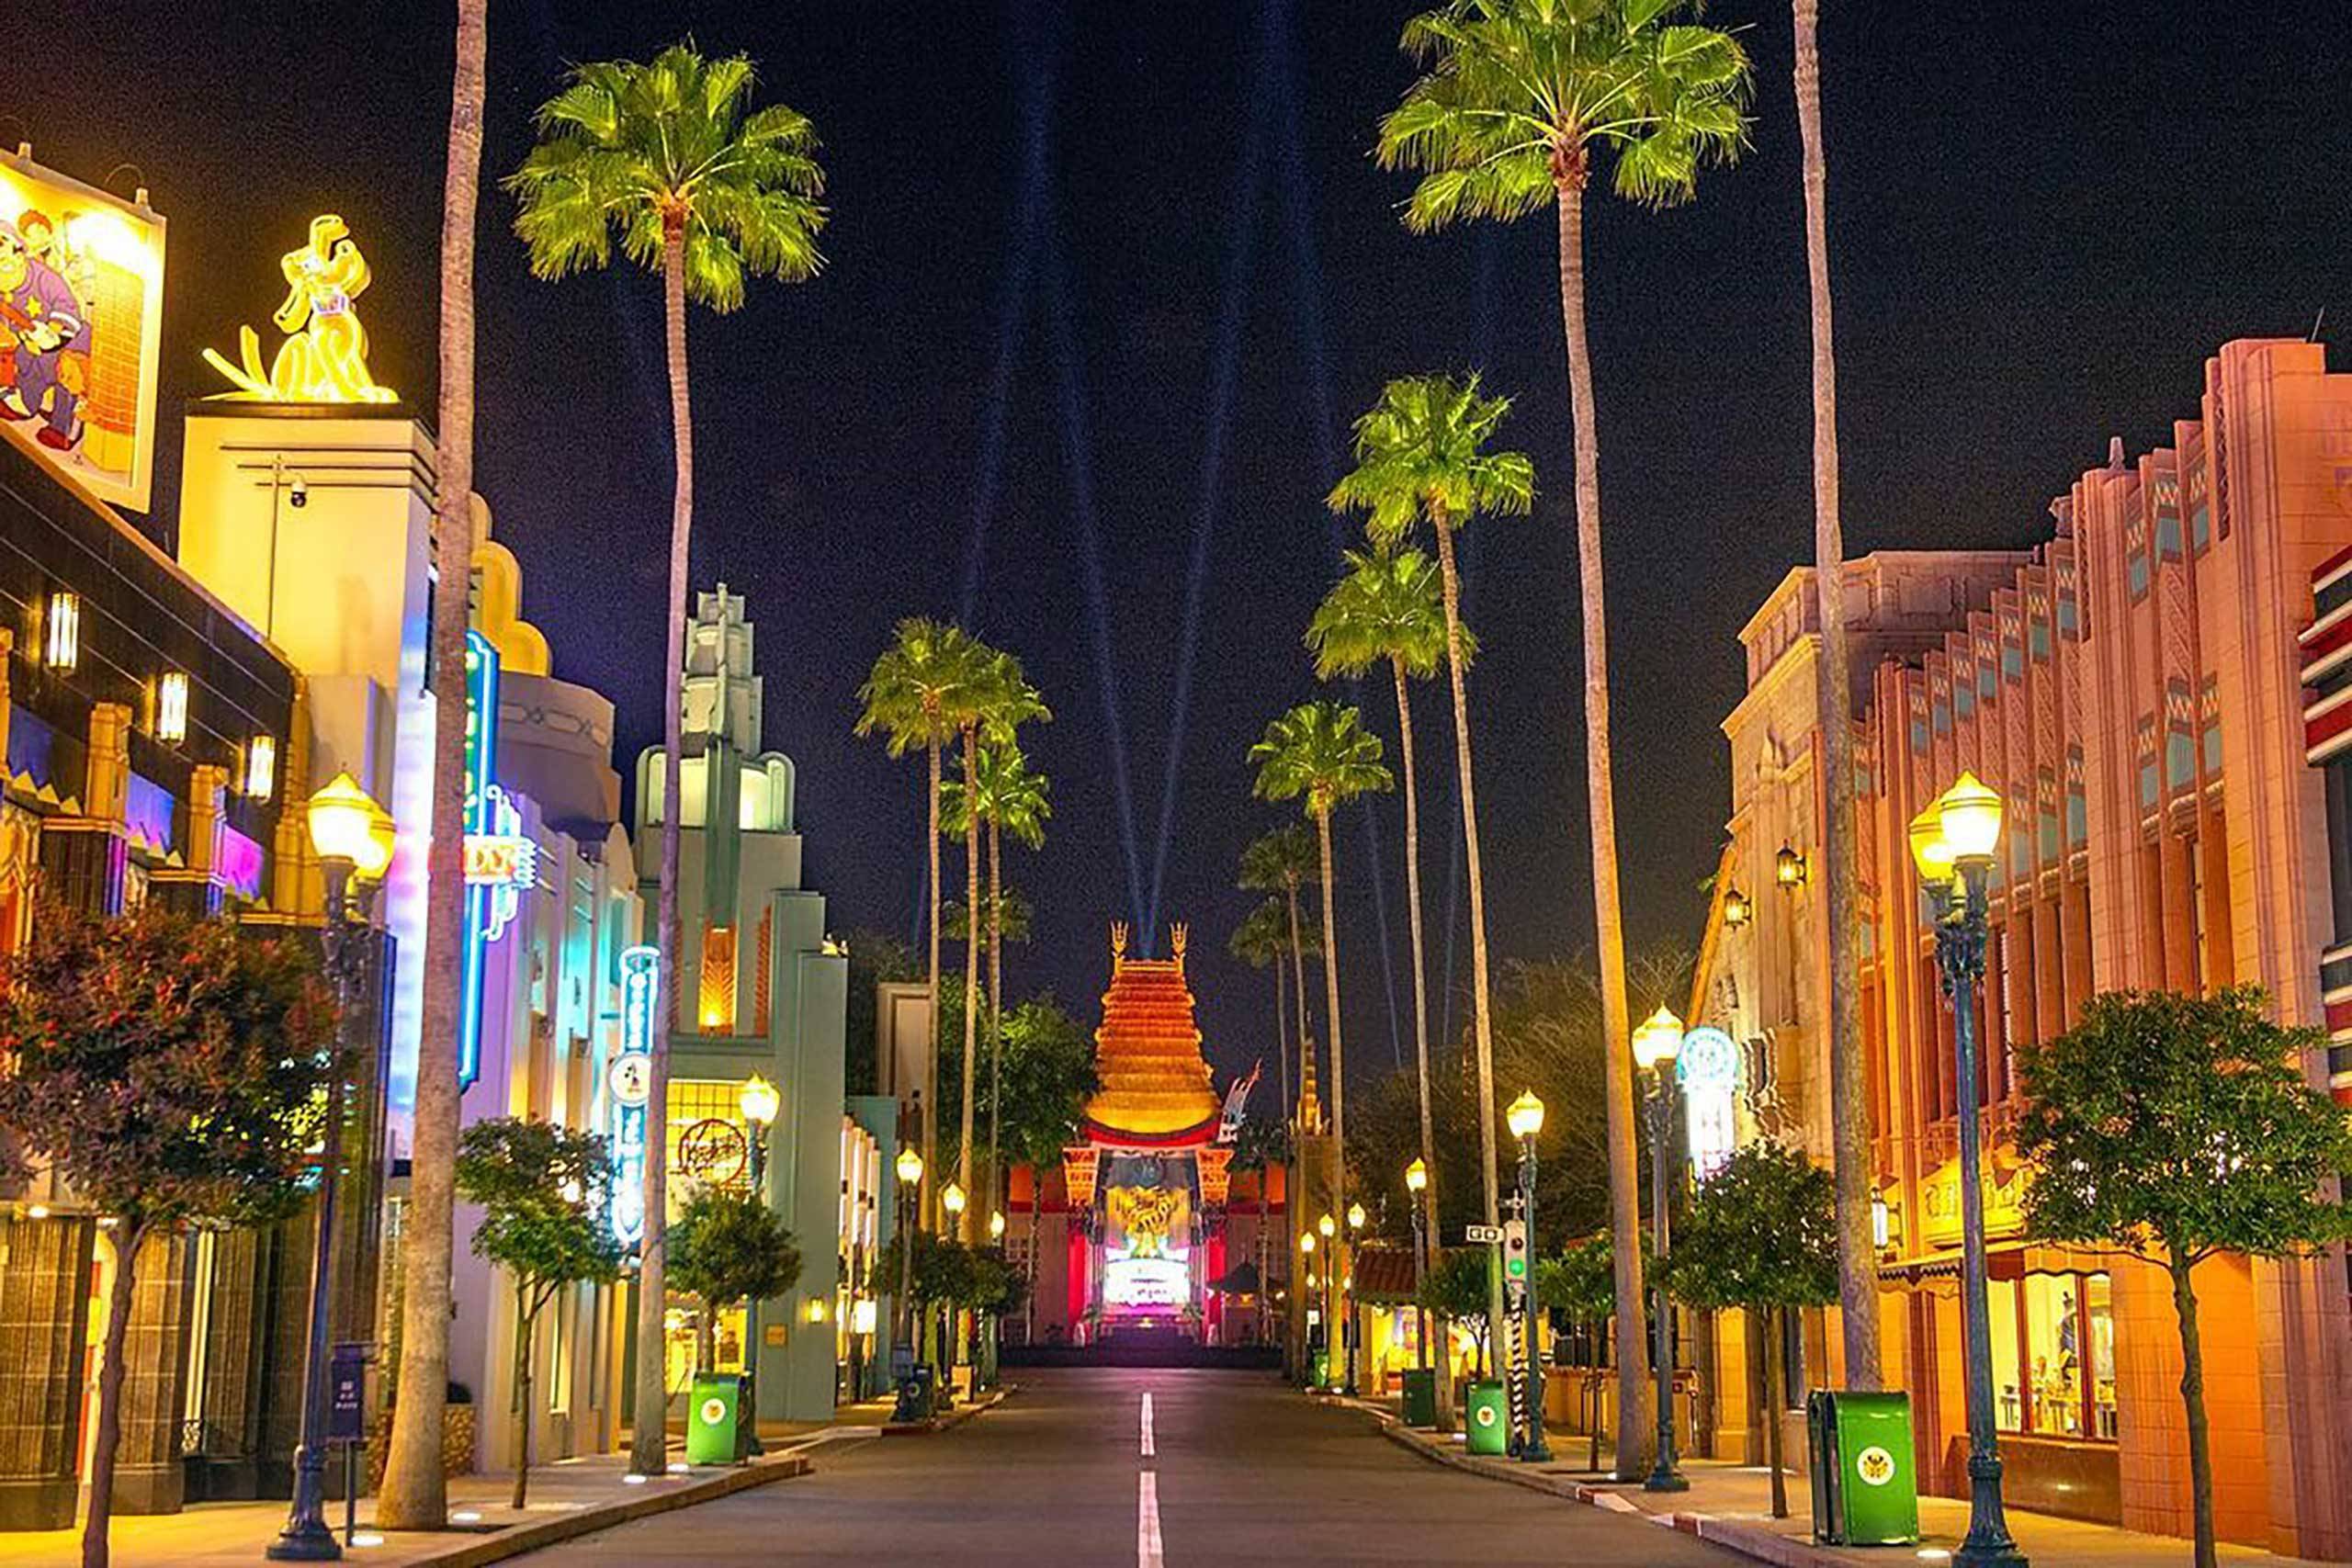 Spotlights return to Disney's Hollywood Studios with new lighting at the Chinese Theatre